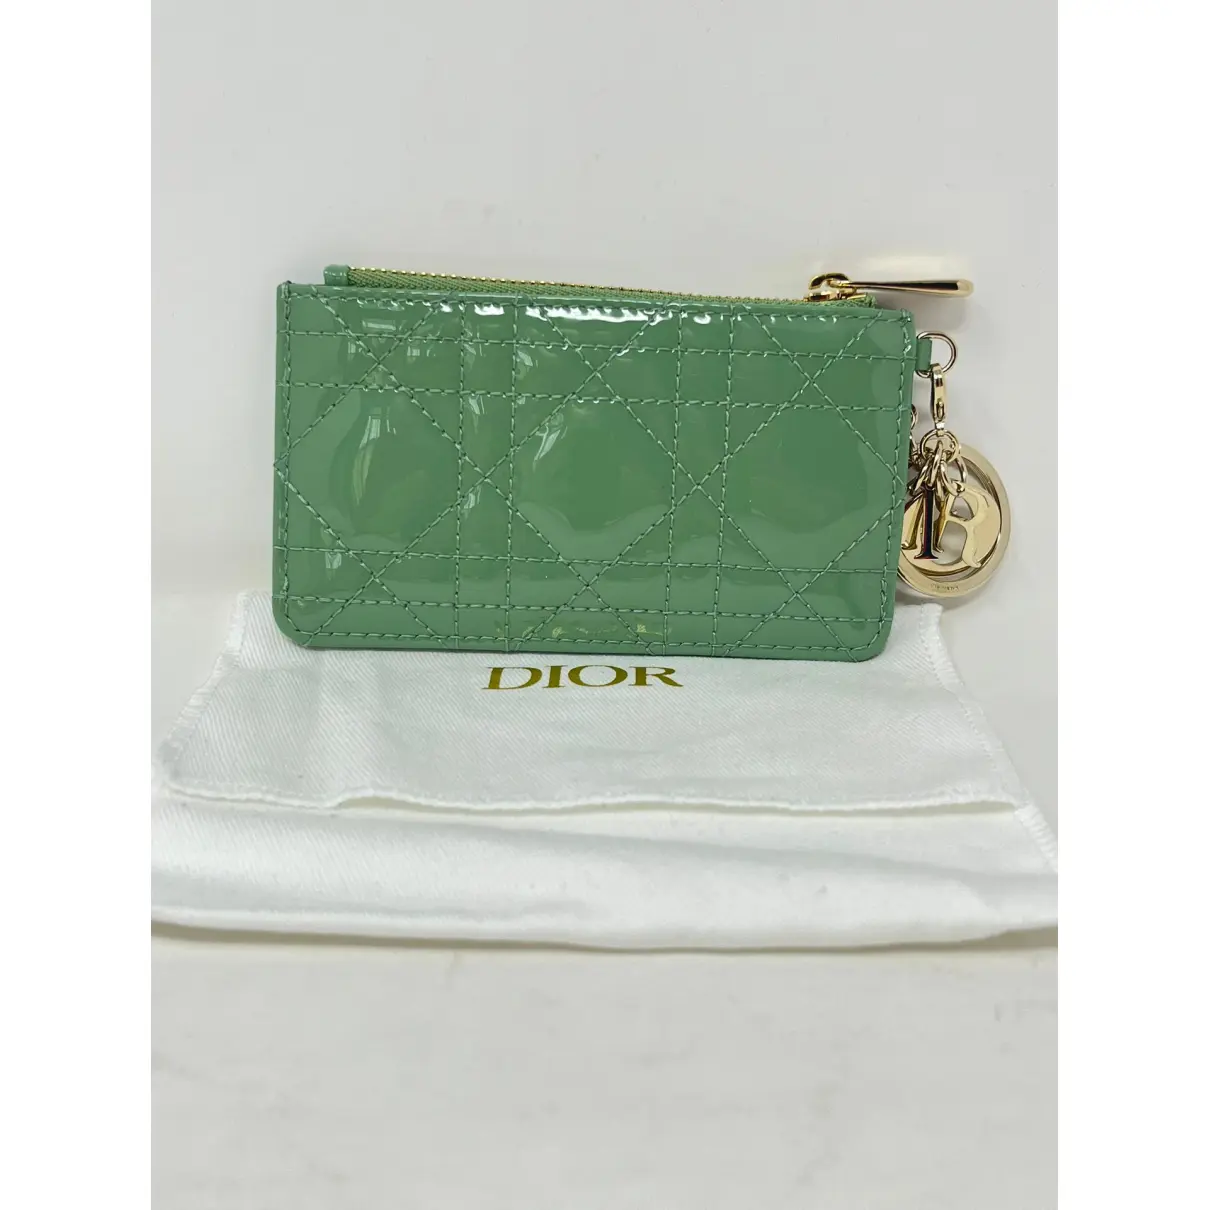 Buy Dior Lady Dior patent leather purse online